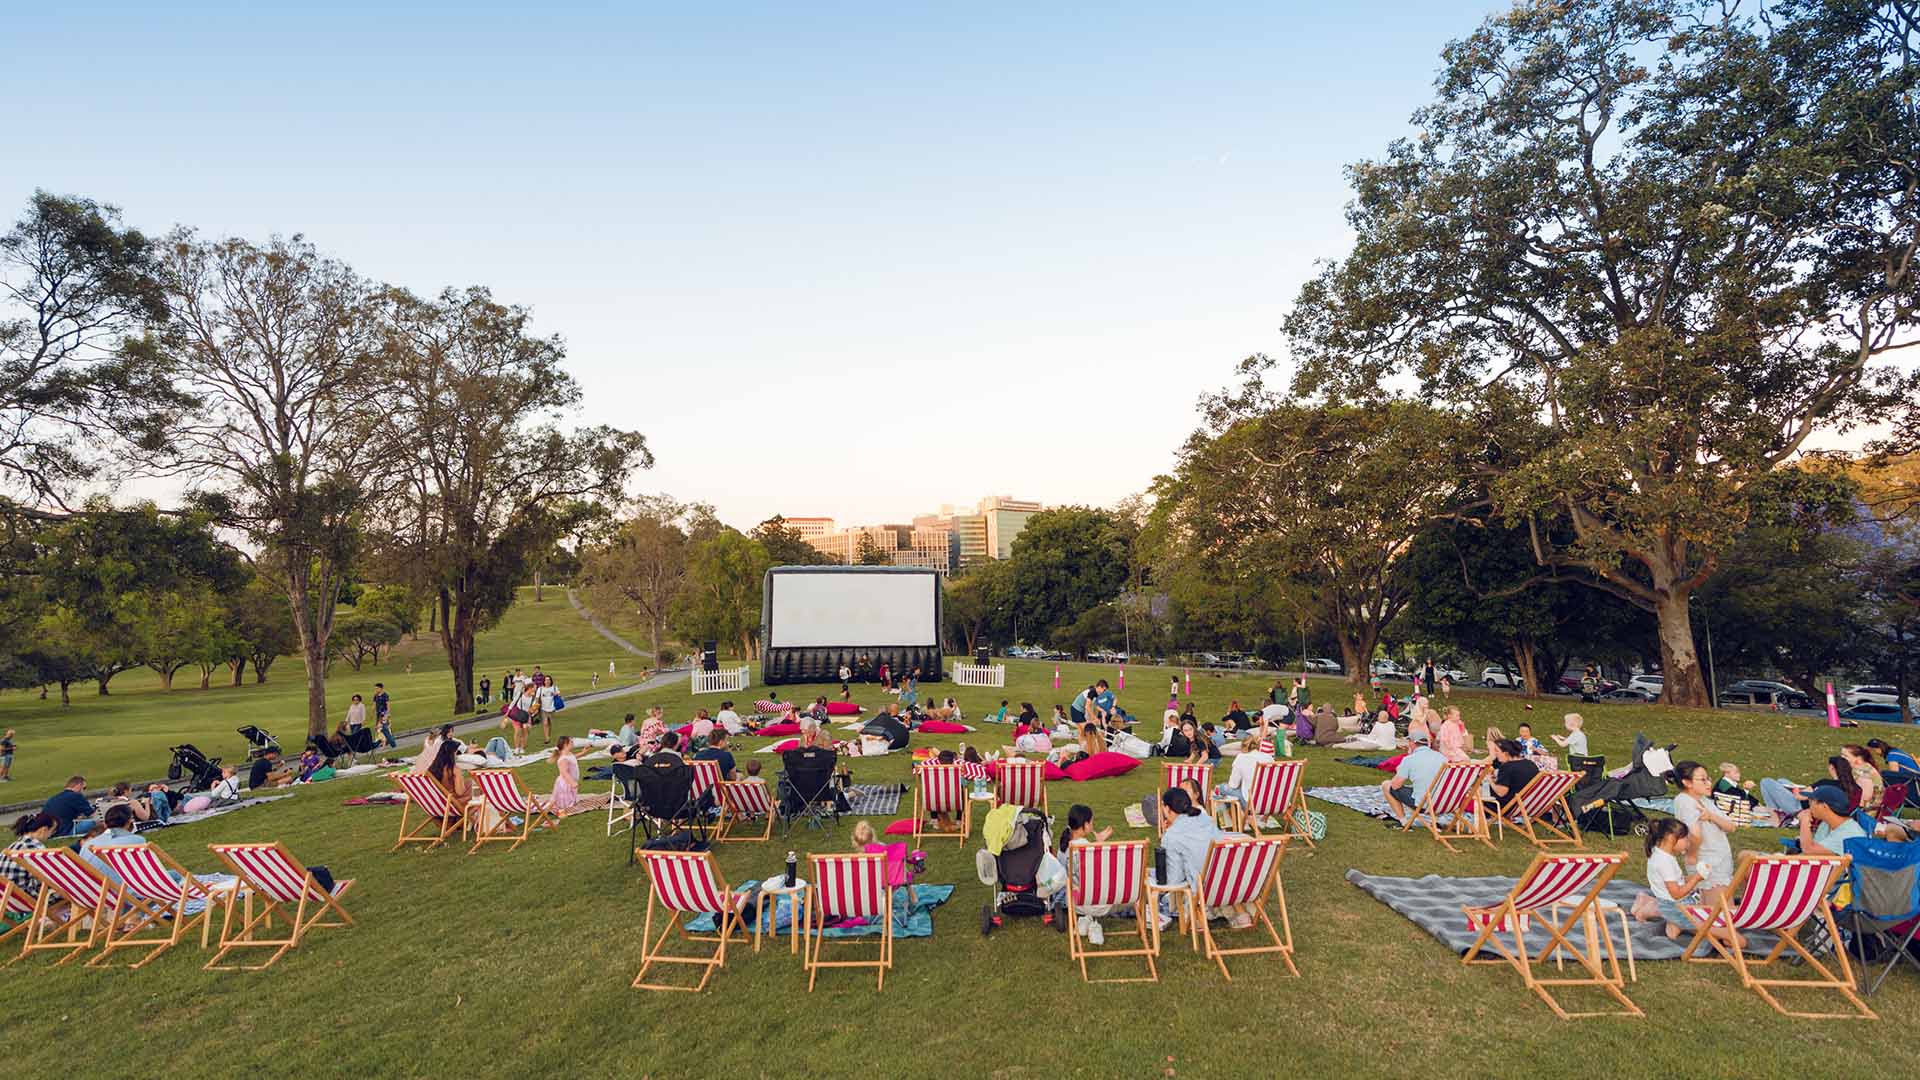 Outdoor Cinema in the Suburbs: Pawsome Movie Night